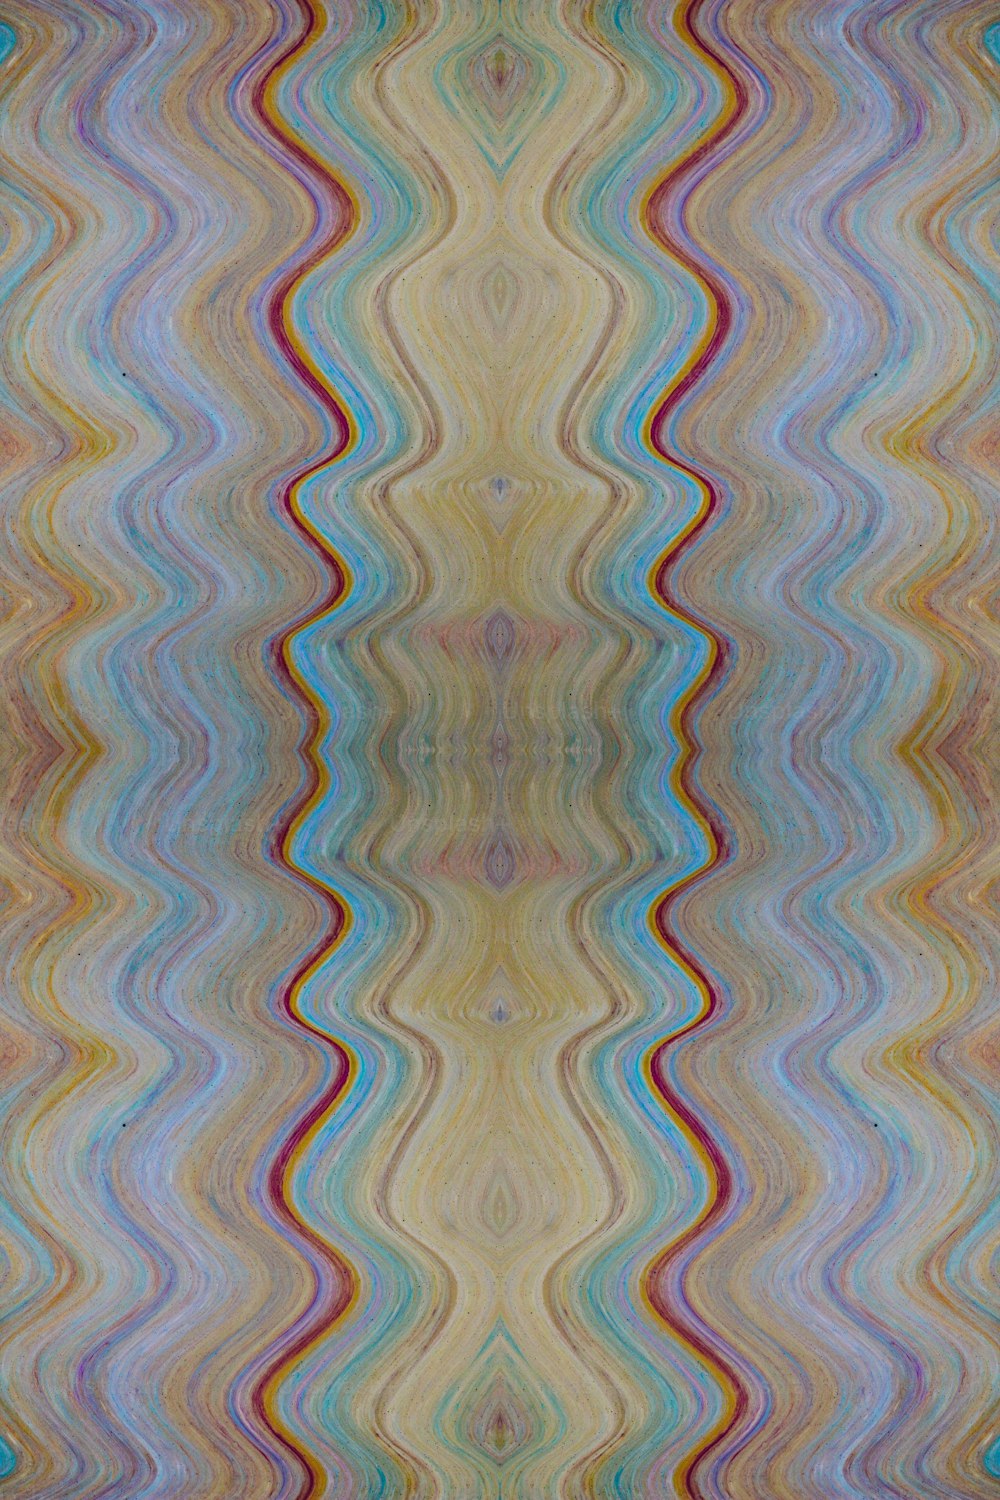 a multicolored pattern of wavy lines